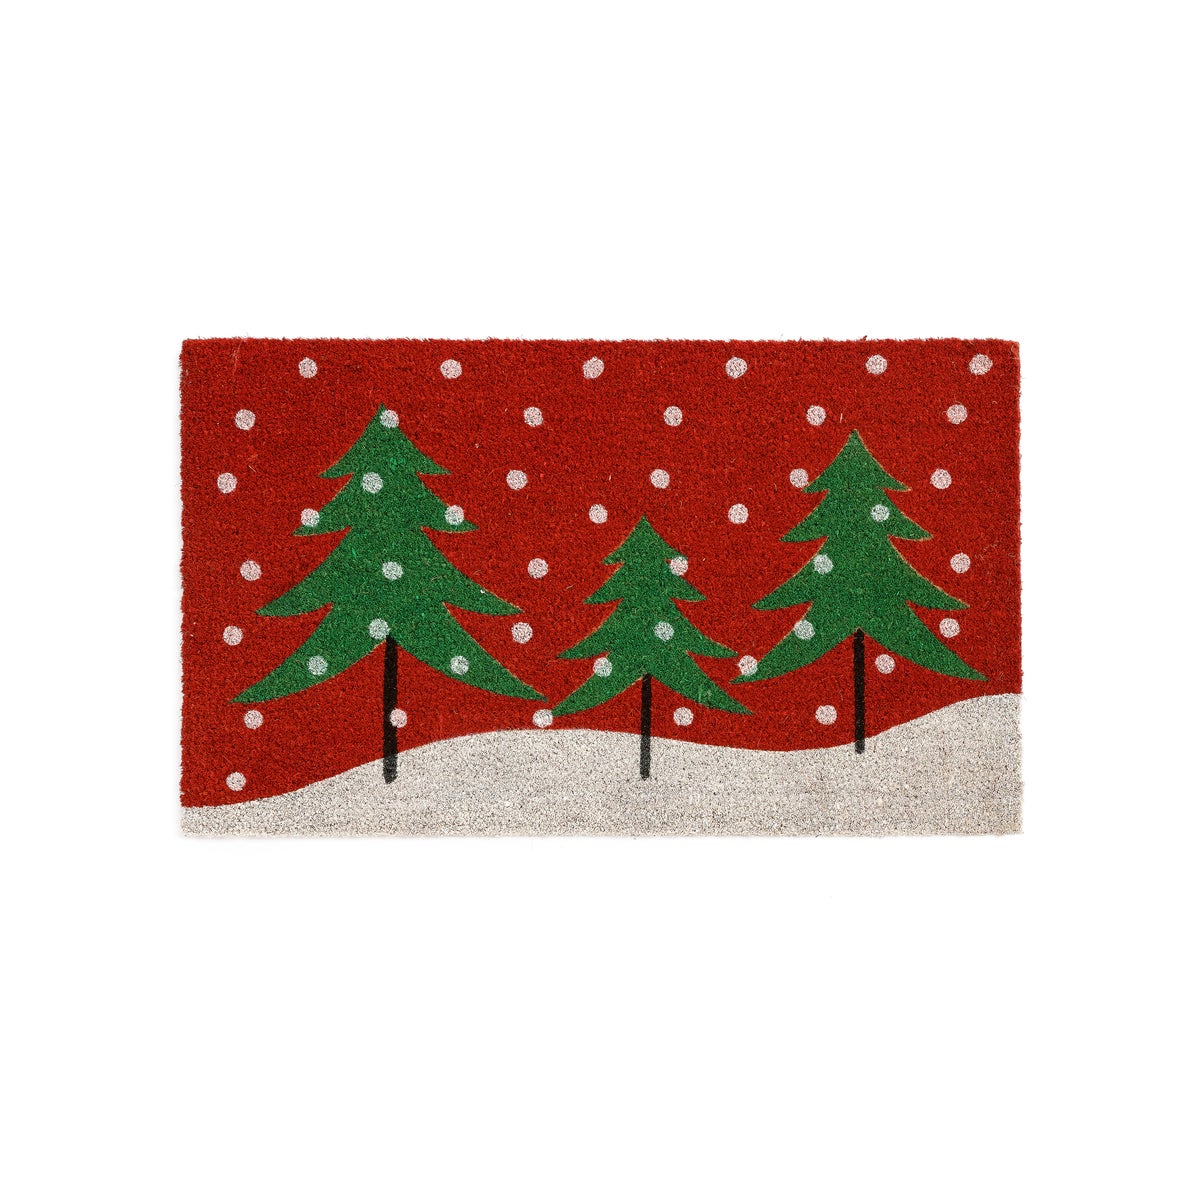 Snowy Christmas Trees Doormat | Red, Green And Beige